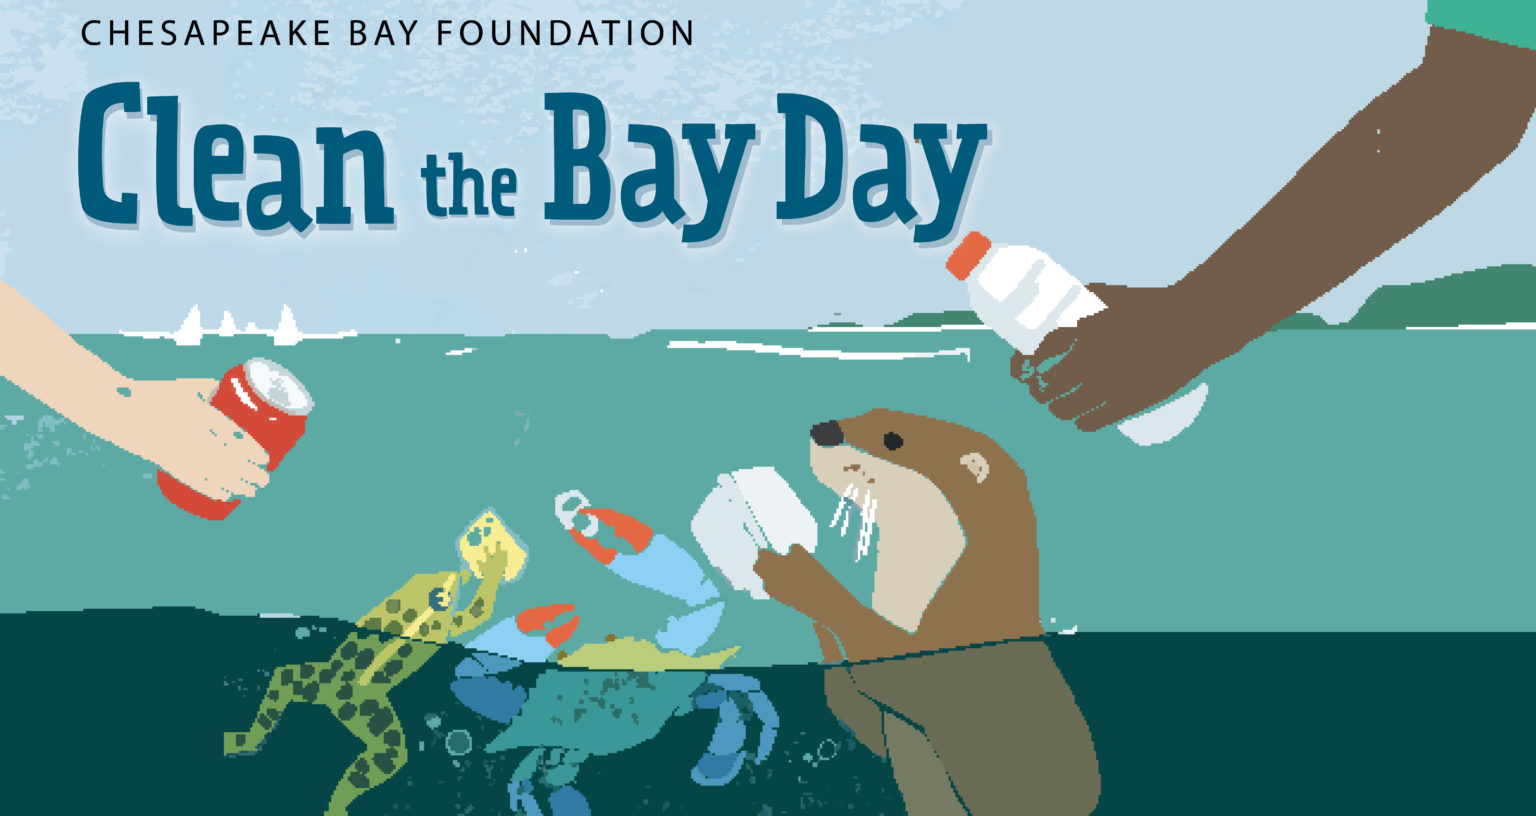 Special Event Clean the Bay Day with the Chesapeake Bay Foundation